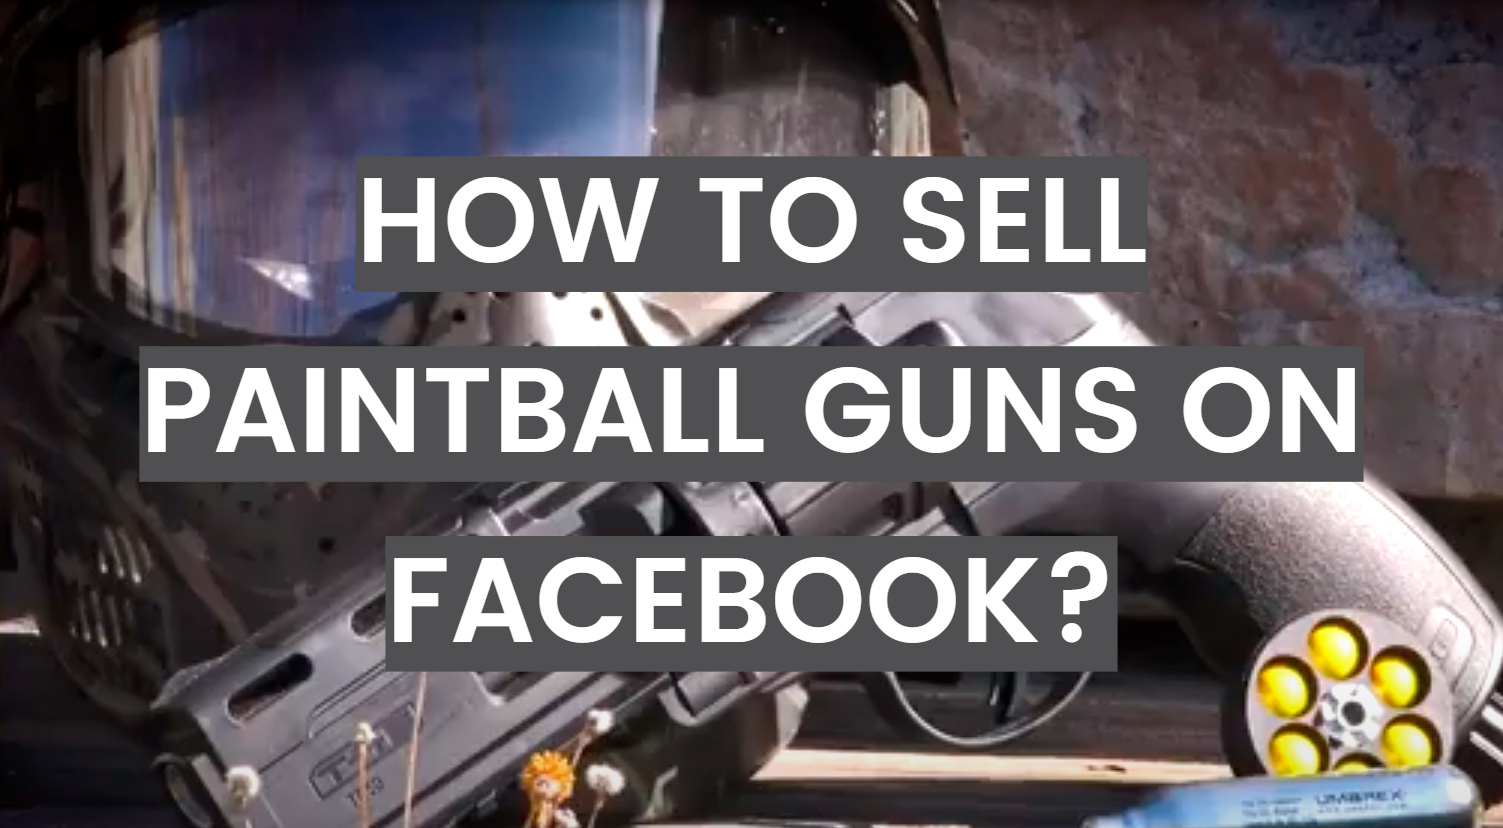 How to Sell Paintball Guns on Facebook?